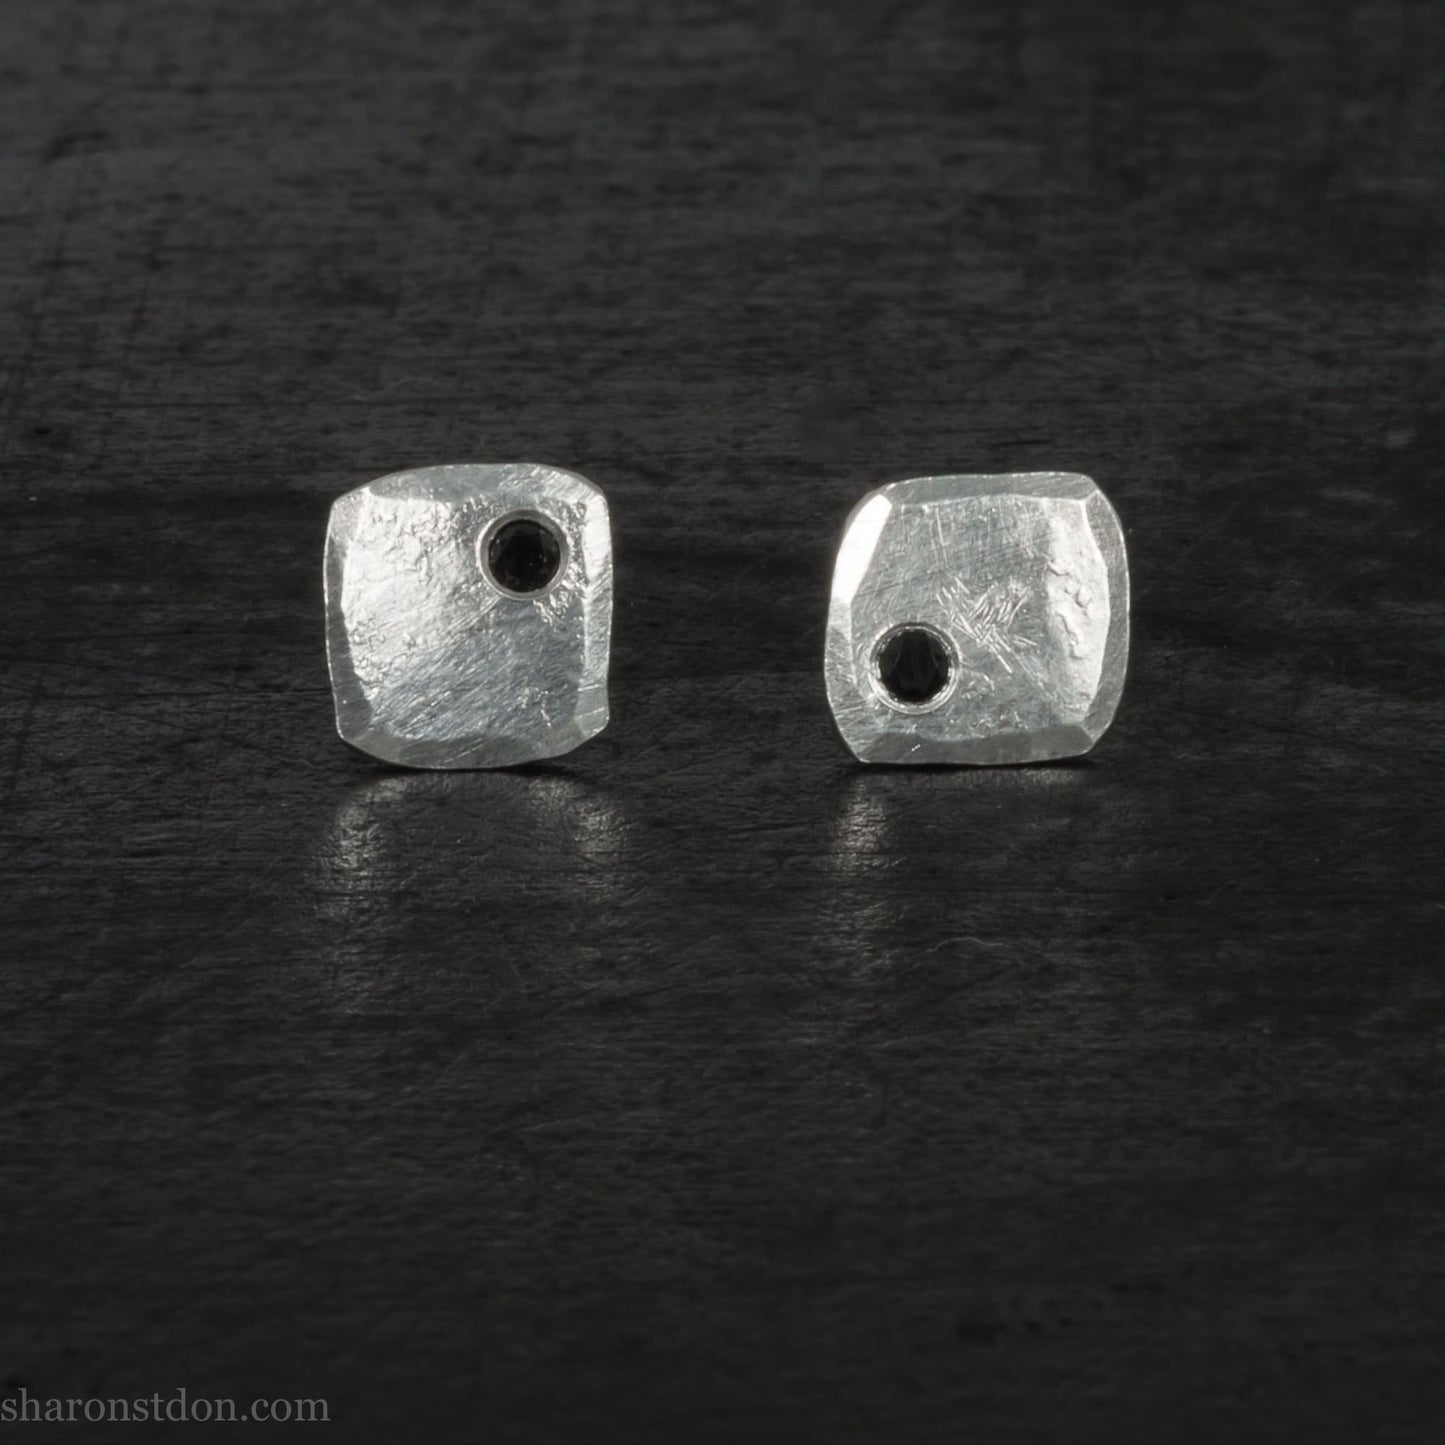 7mm x 7mm Handmade 925 sterling silver stud earrings with black spinel gemstone in the corner. Shiny, small square stud earrings made by Sharon SaintDon in North America.